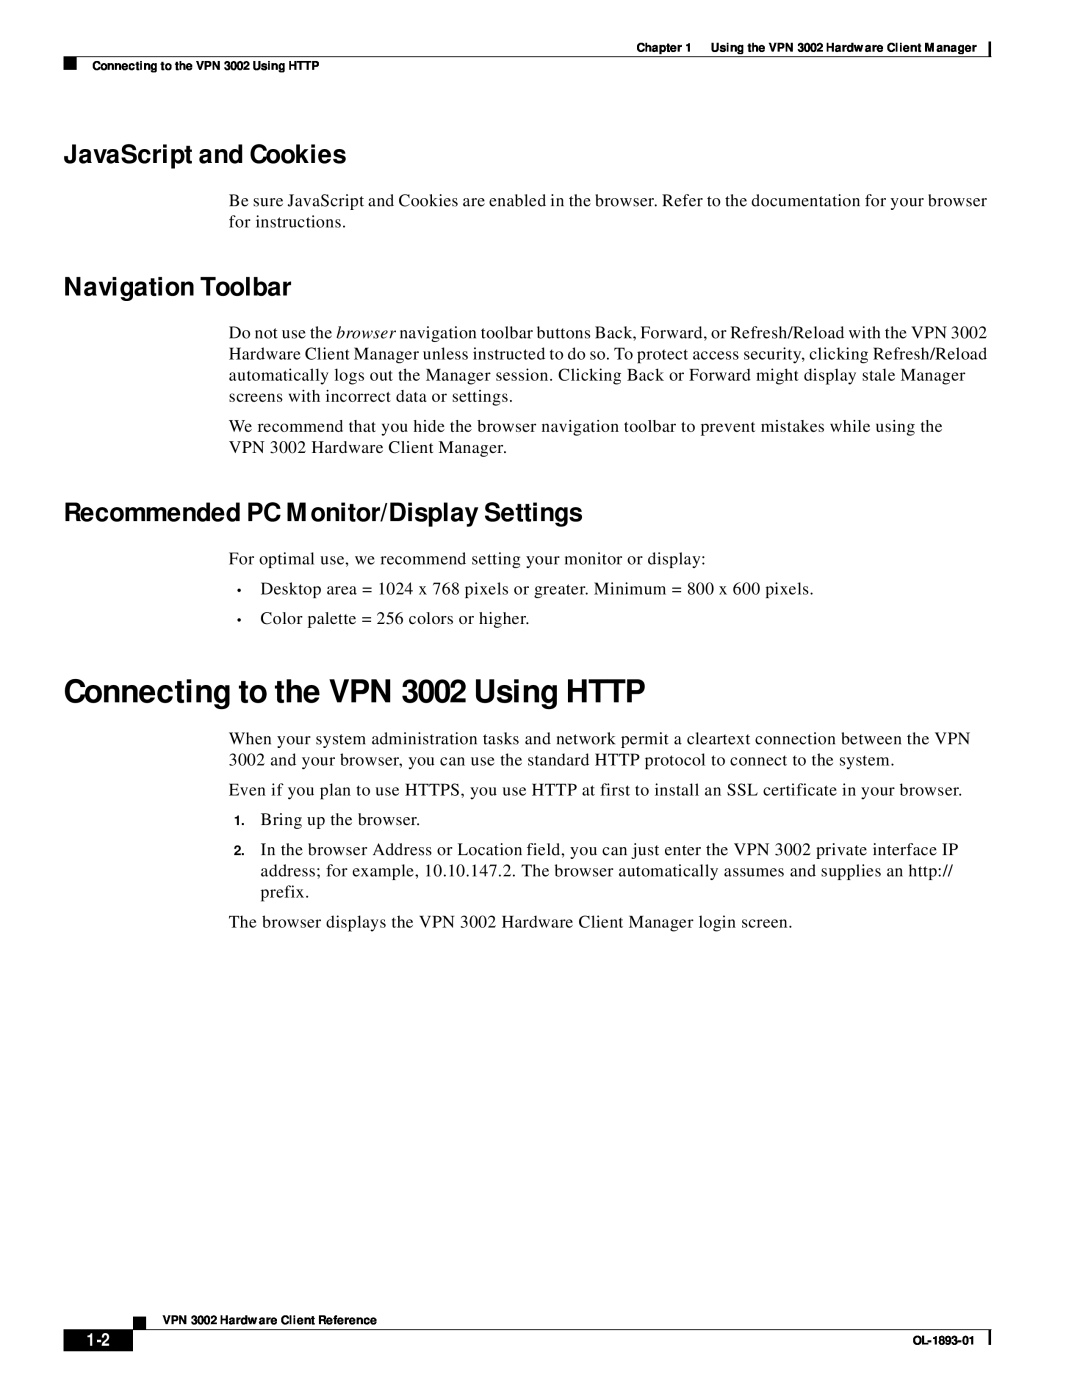 Cisco Systems manual Connecting to the VPN 3002 Using HTTP, JavaScript and Cookies, Navigation Toolbar 